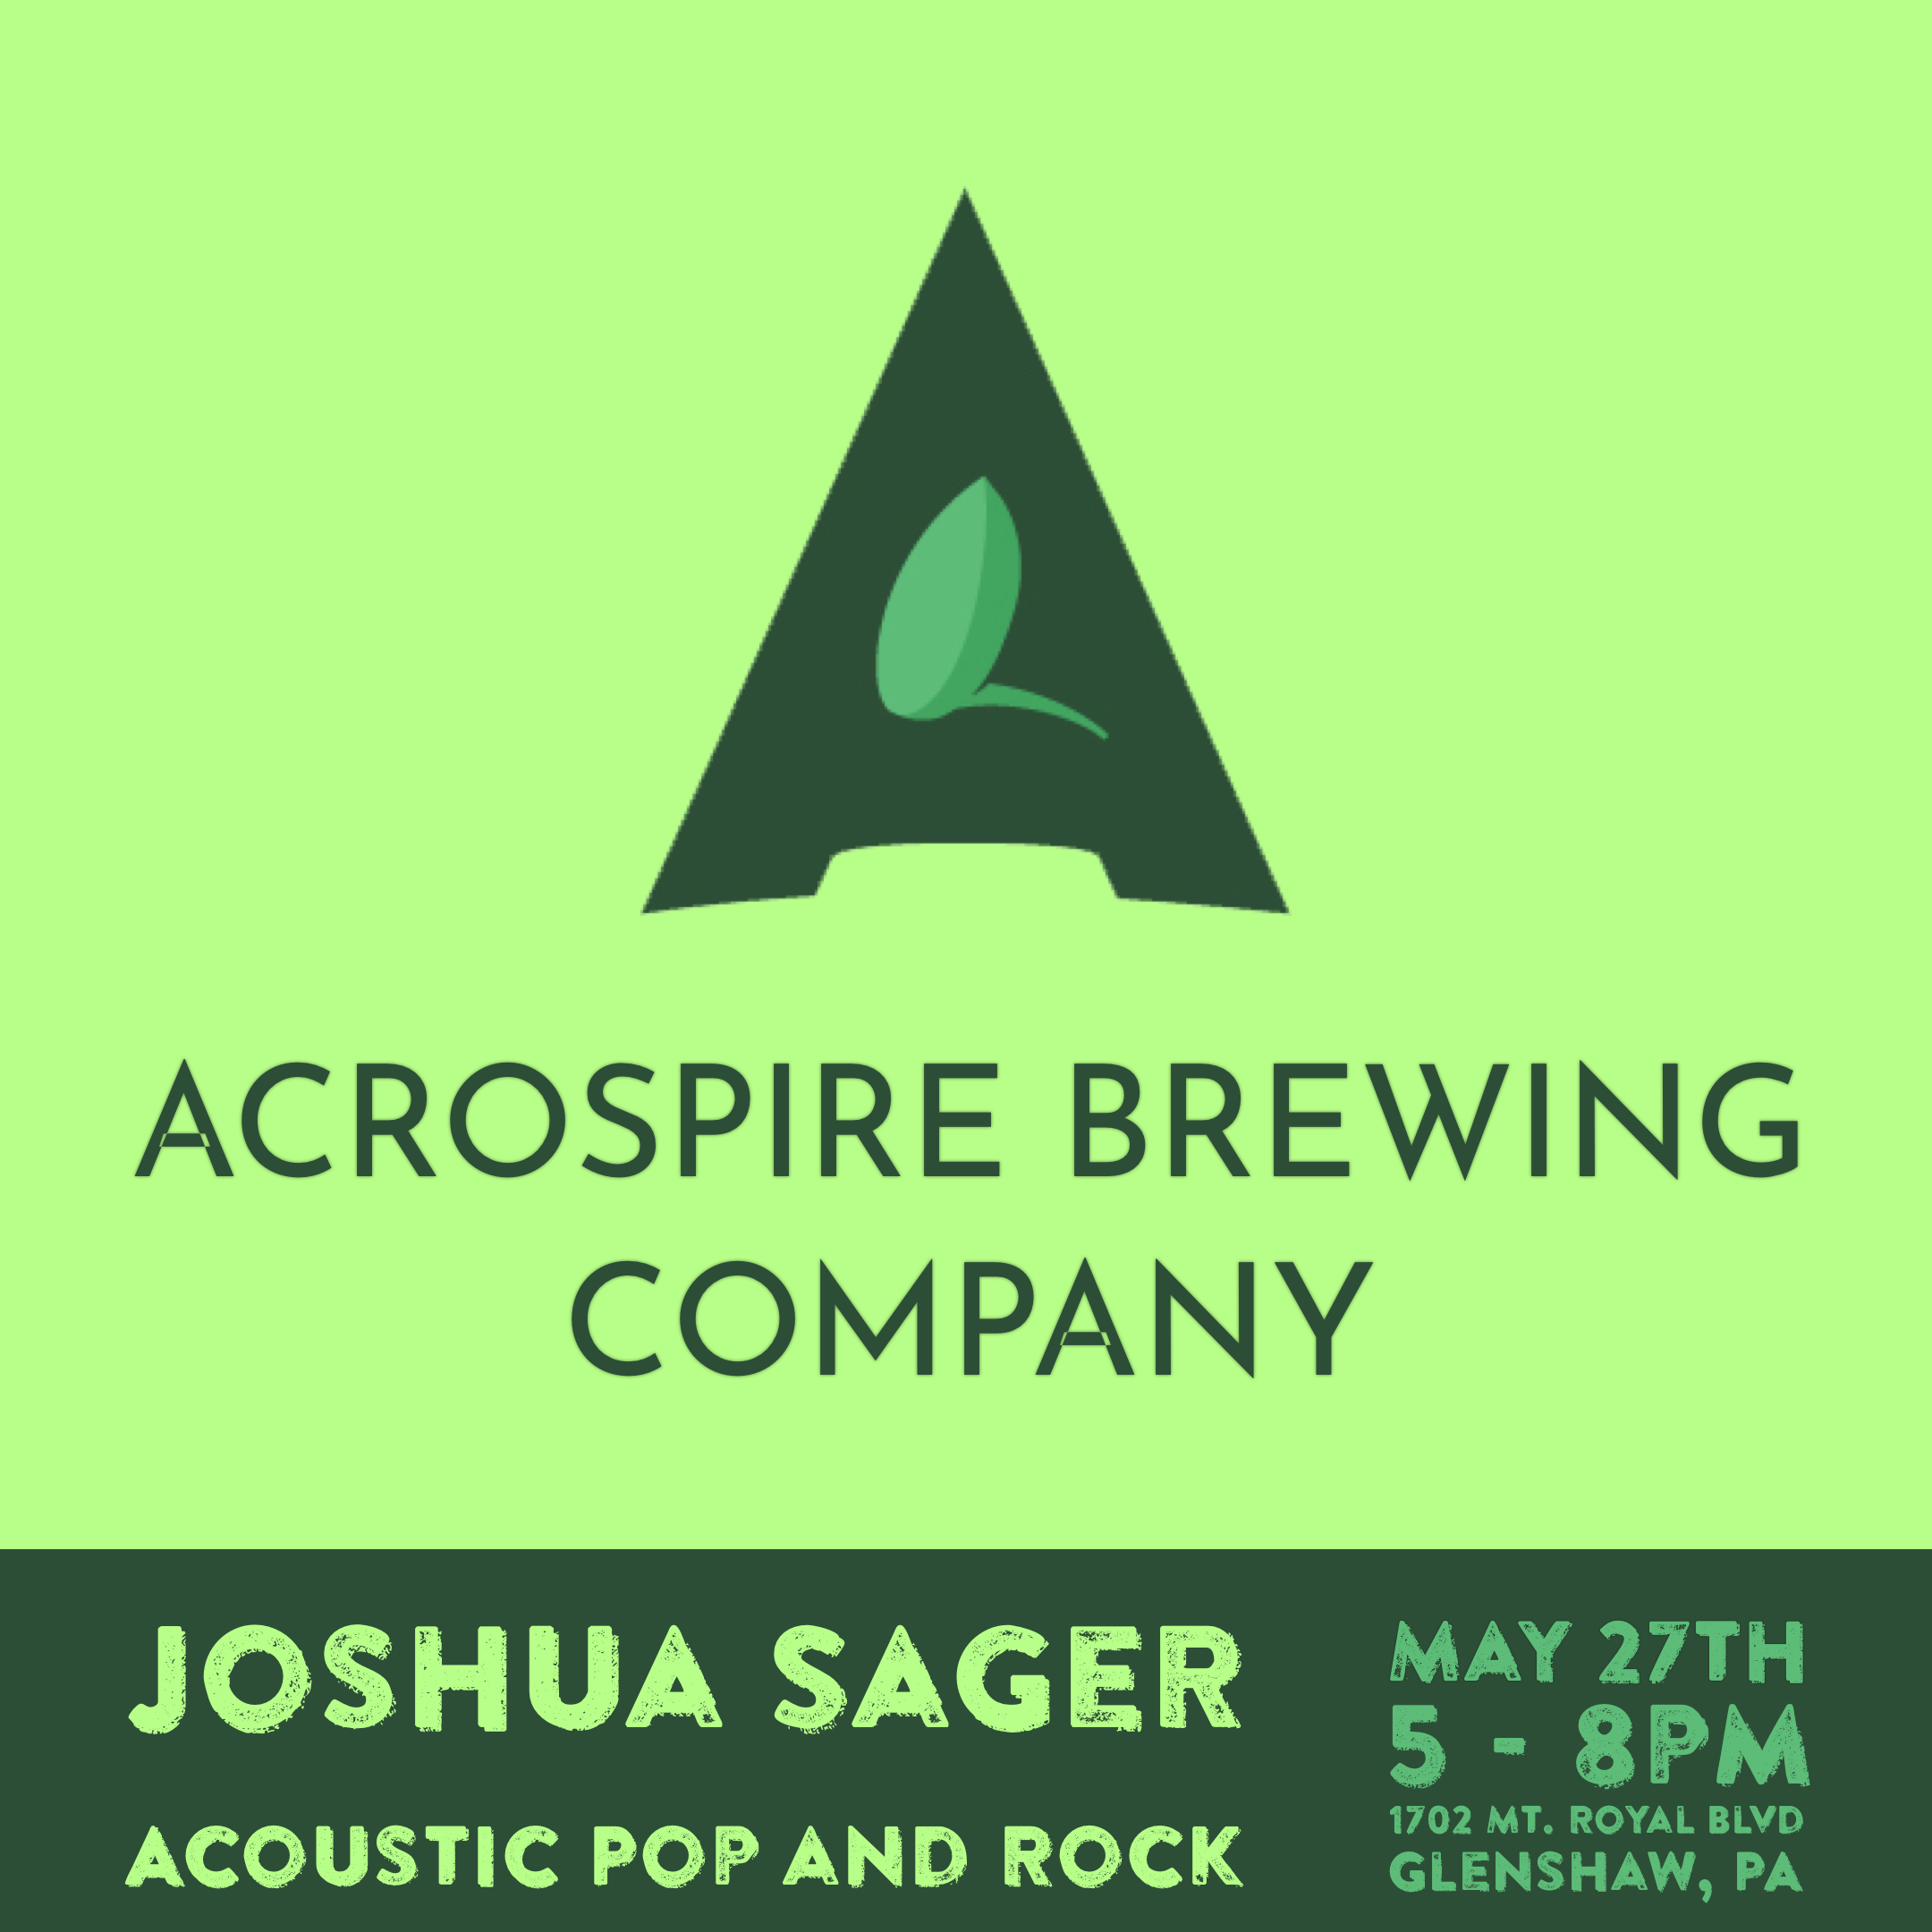 Josh Sager will be perfomring at The Acrospire Brewing Copmany in Glenshaw PA on May 27st from 5pm to 8pm.